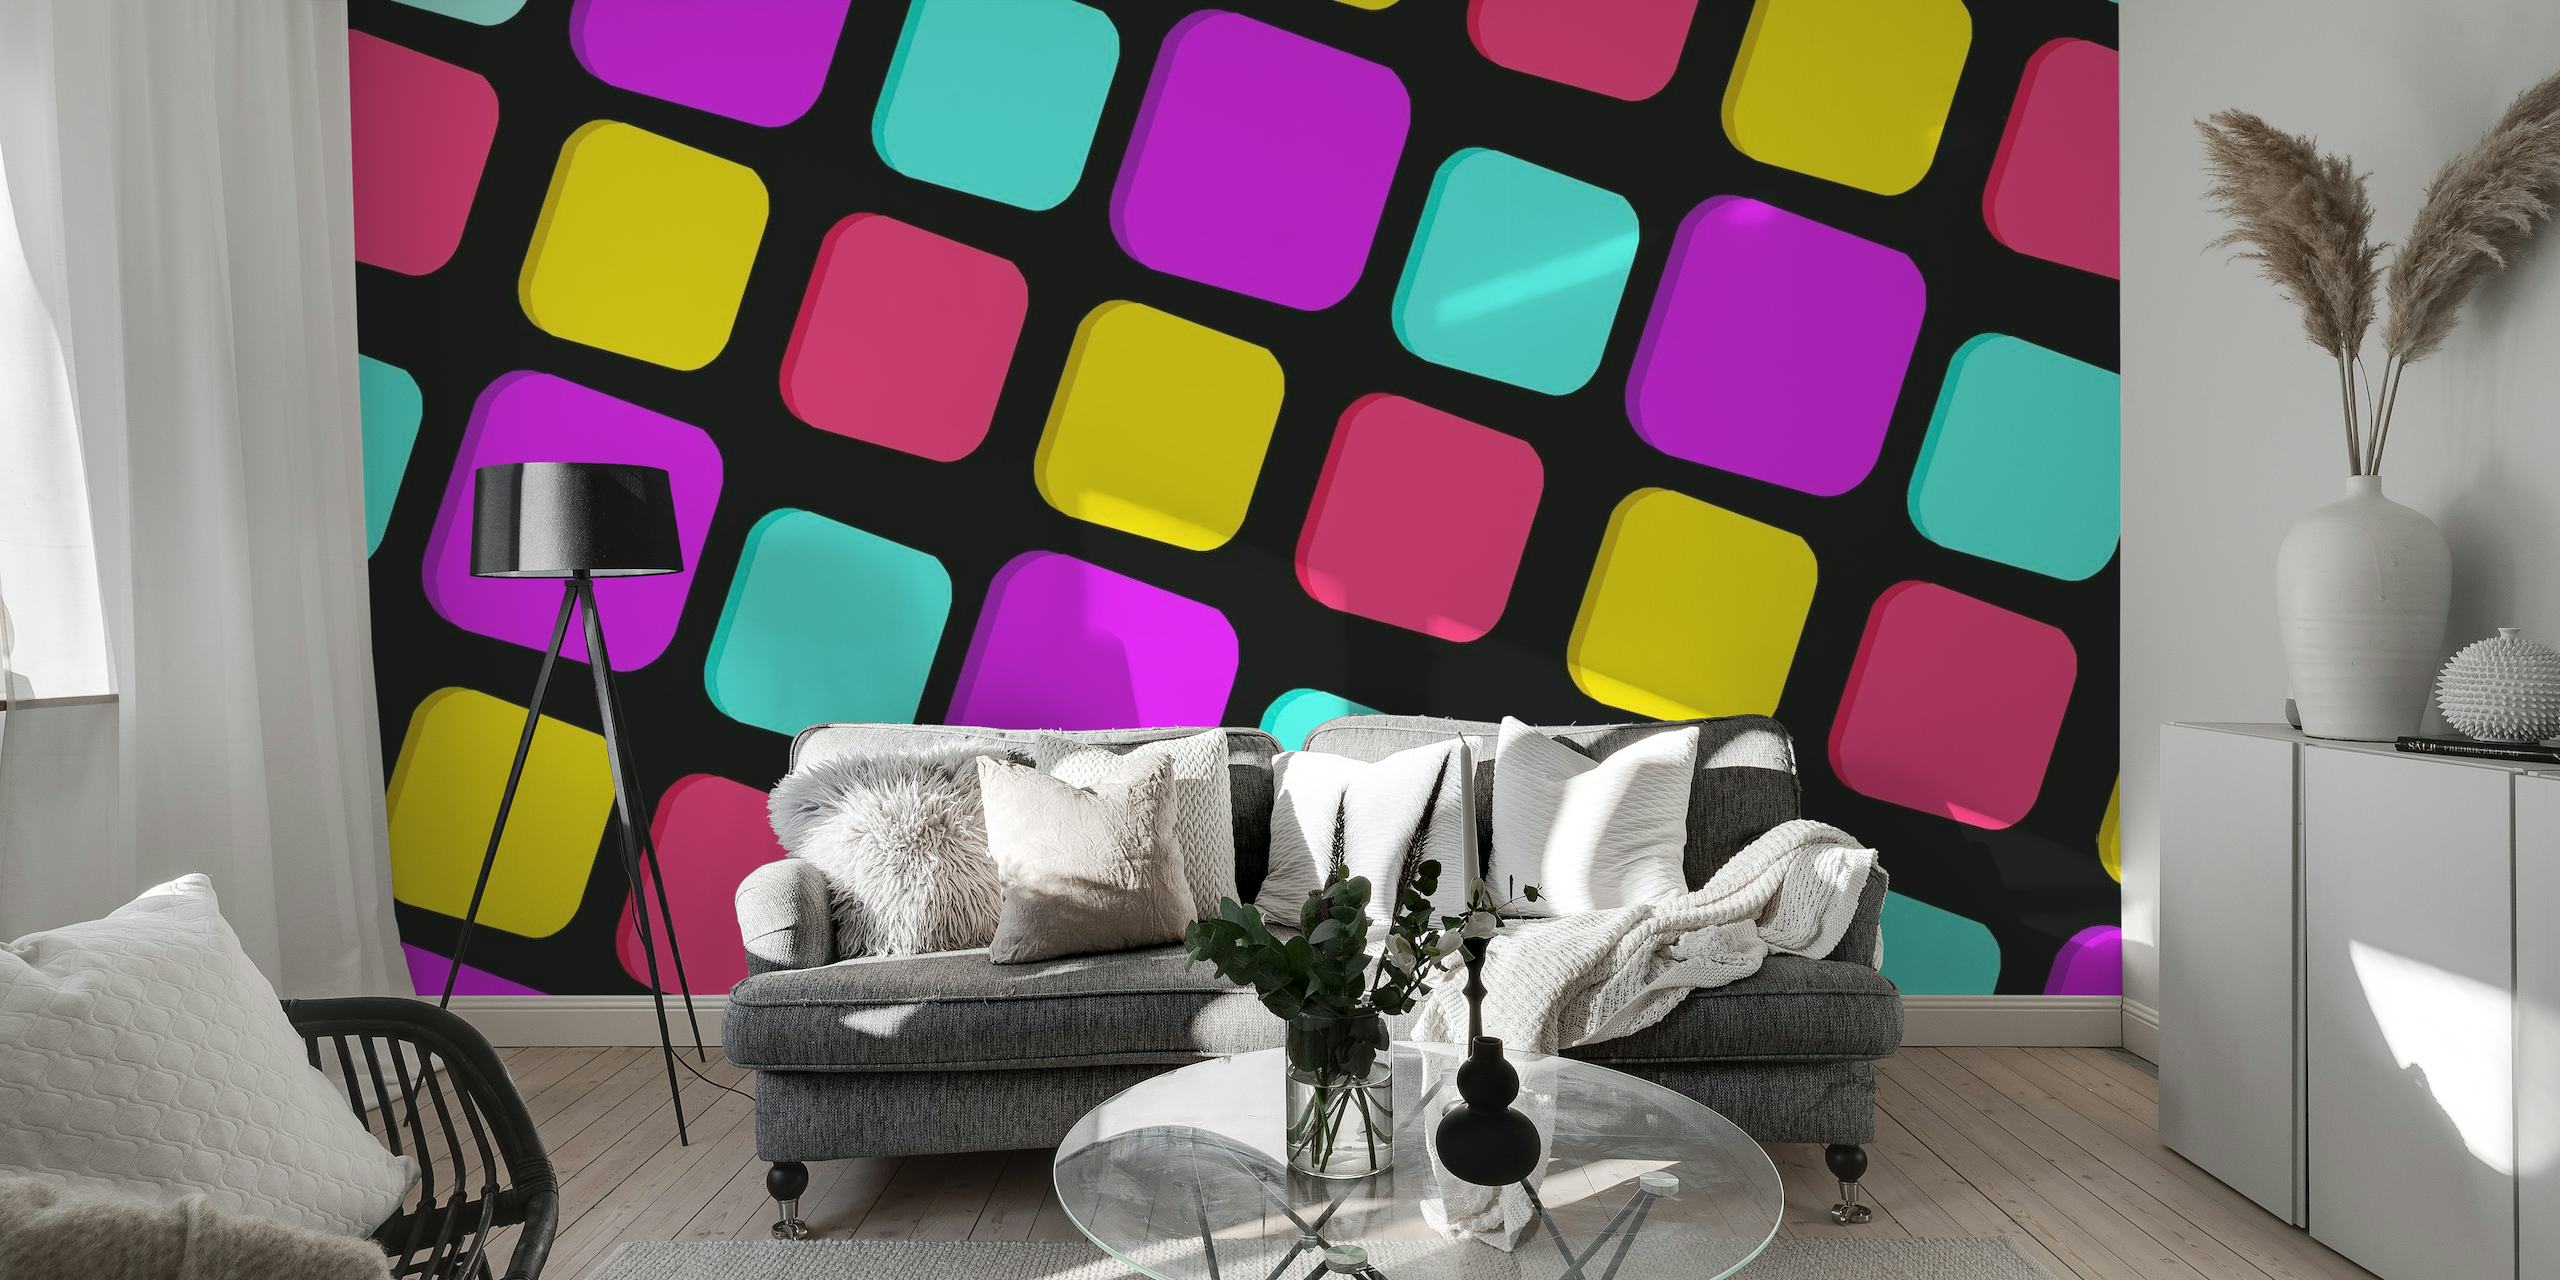 Colorful 3D square geometric pattern wall mural